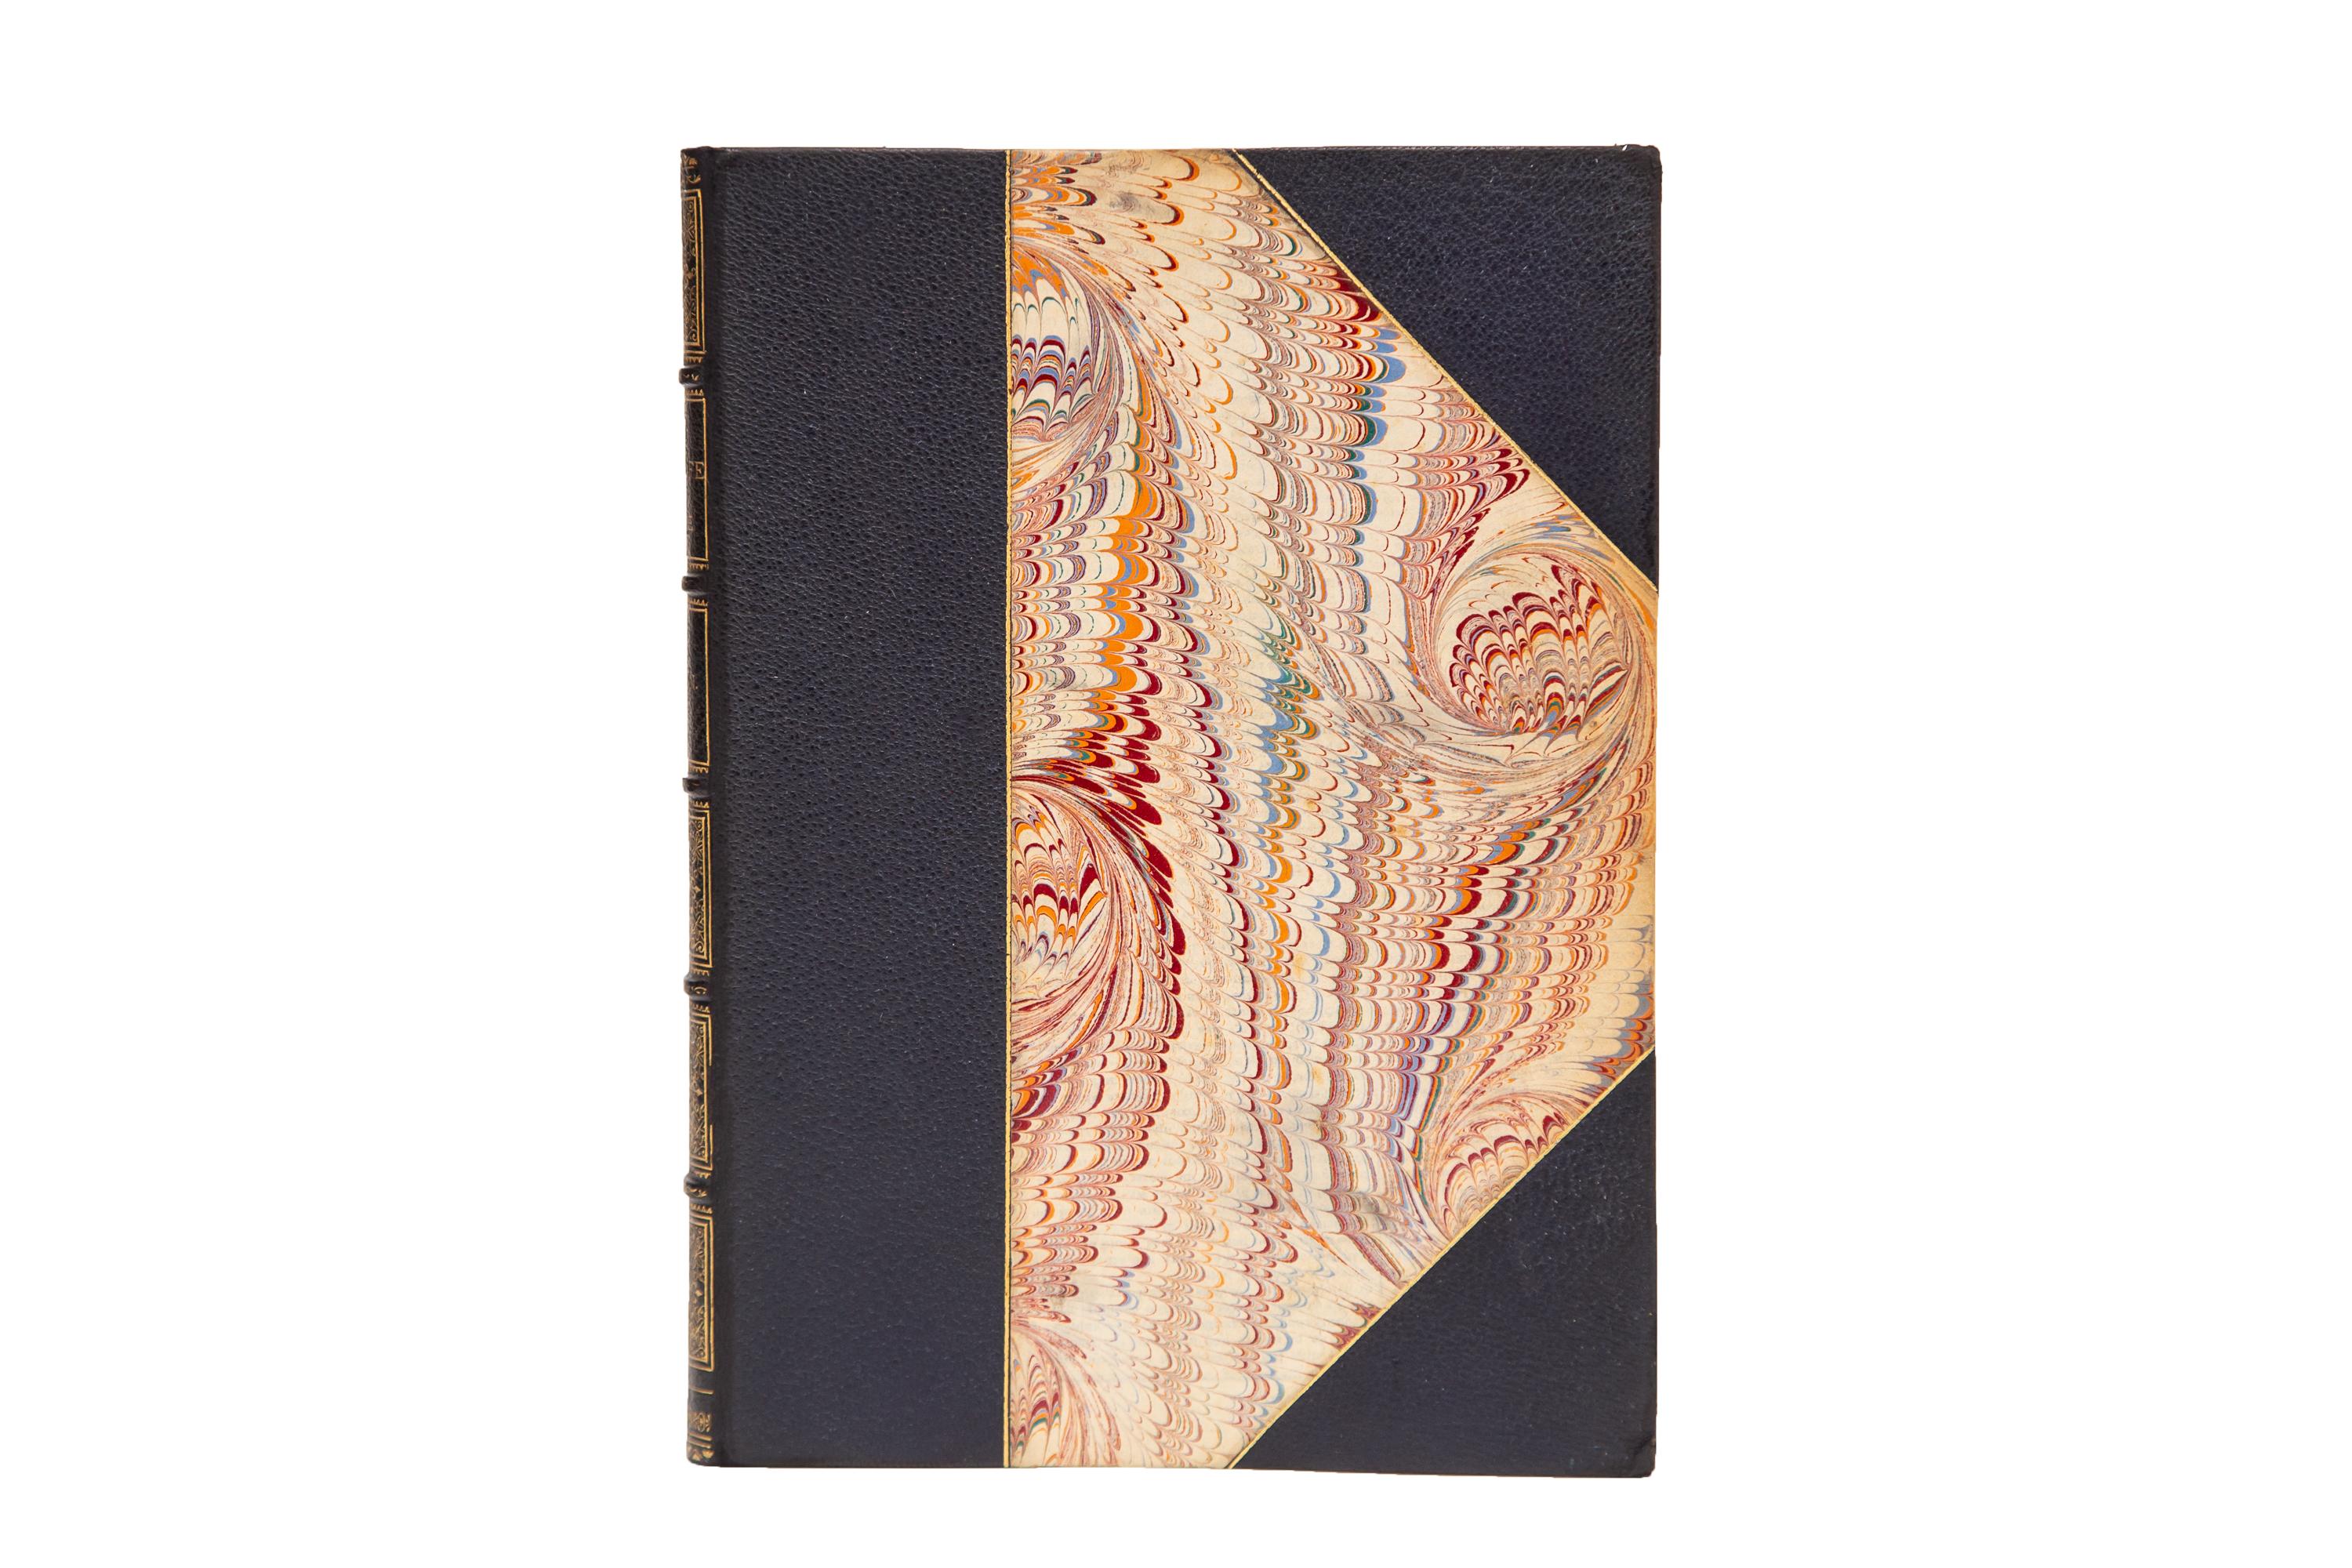 1 Volume. Dante Alighieri, The New Life. Bound in 3/4 navy morocco and marbled boards, bordered in gilt. Raised bands gilt with panels displaying beautiful Egyptian floral gilt tooling and label lettering in gilt. The top edge is gilt with marbled